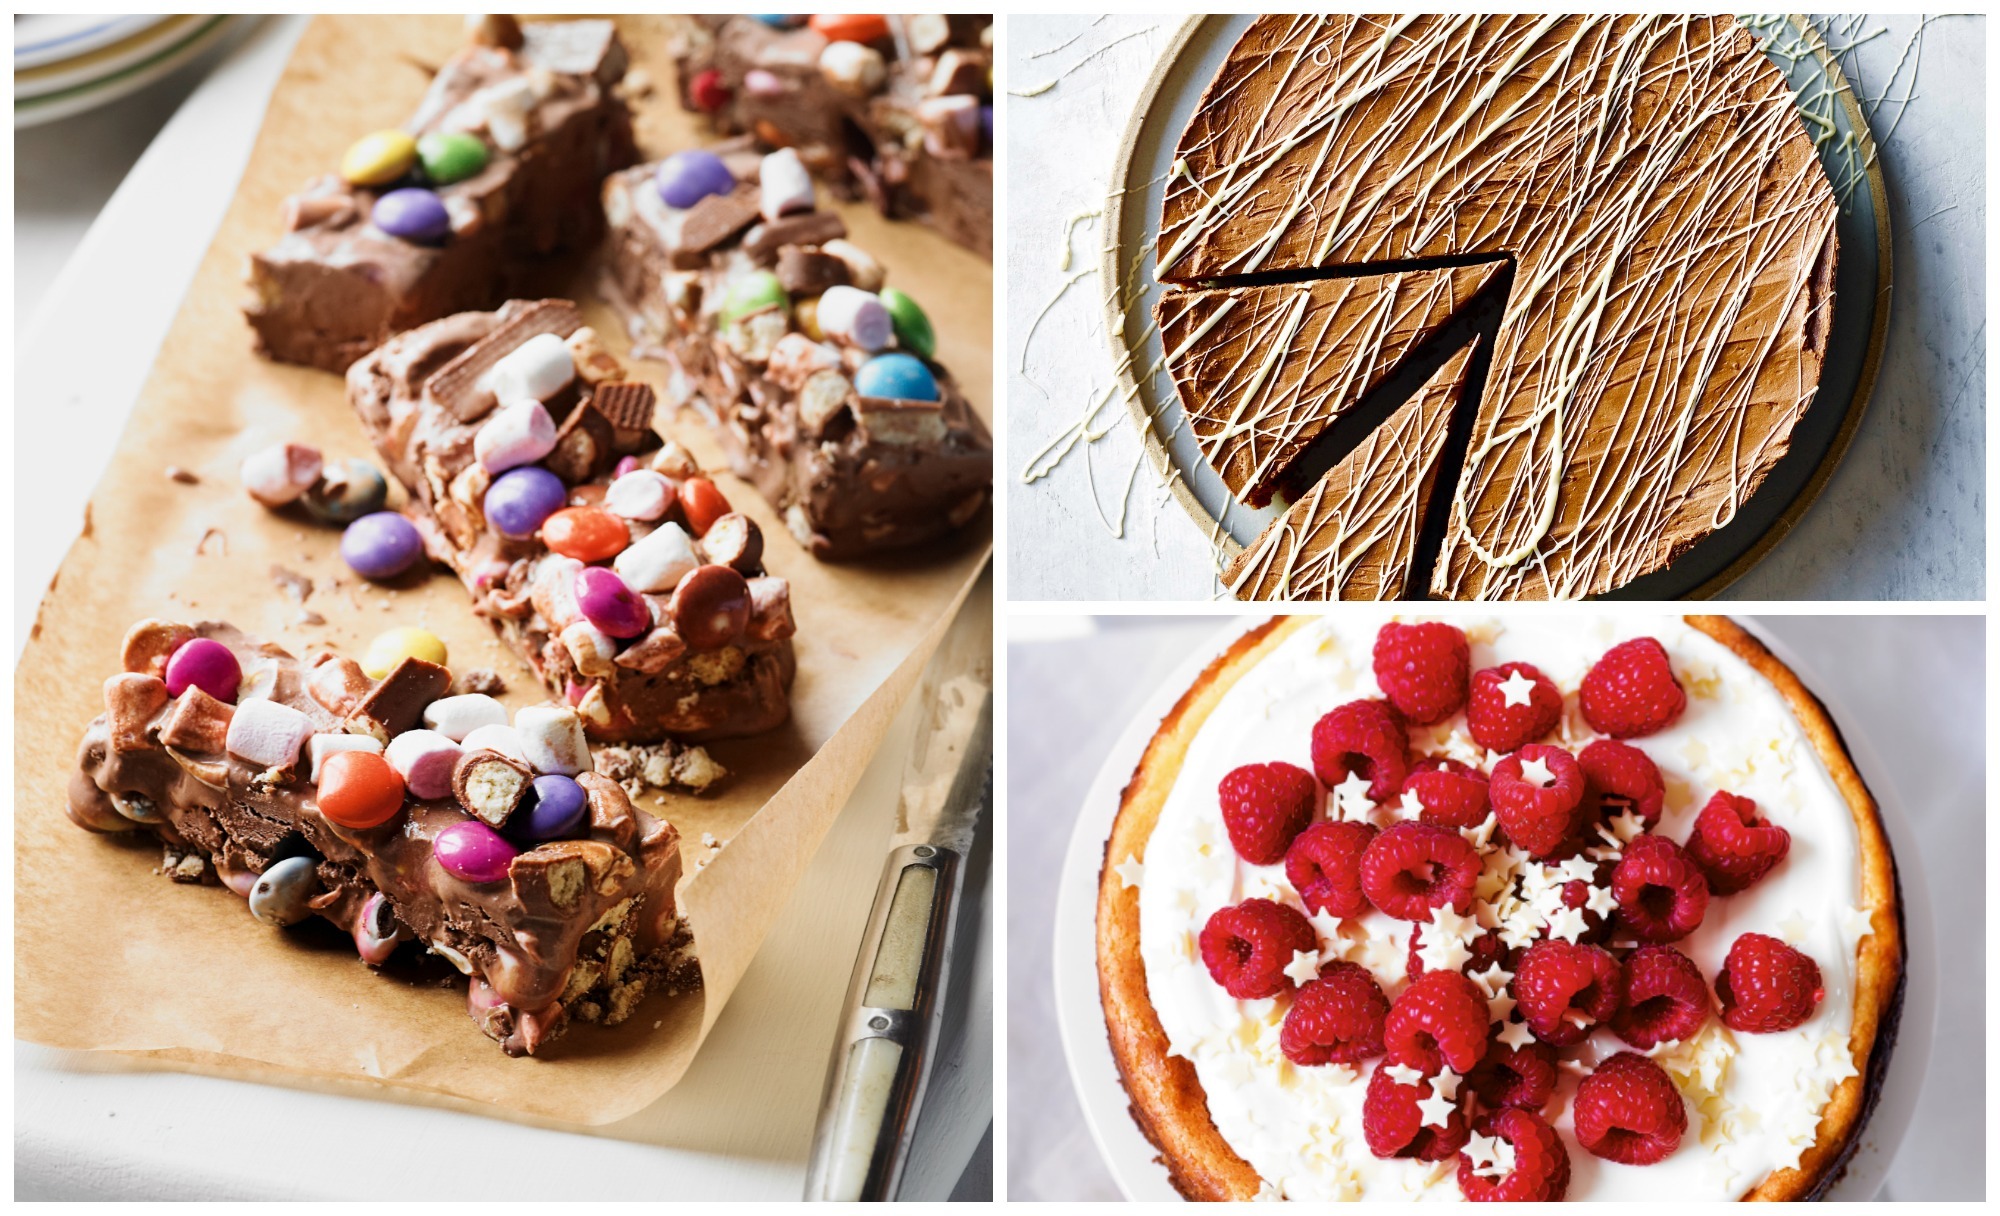 These mouth-watering chocolate recipes are the perfect treat for today (Waitrose)